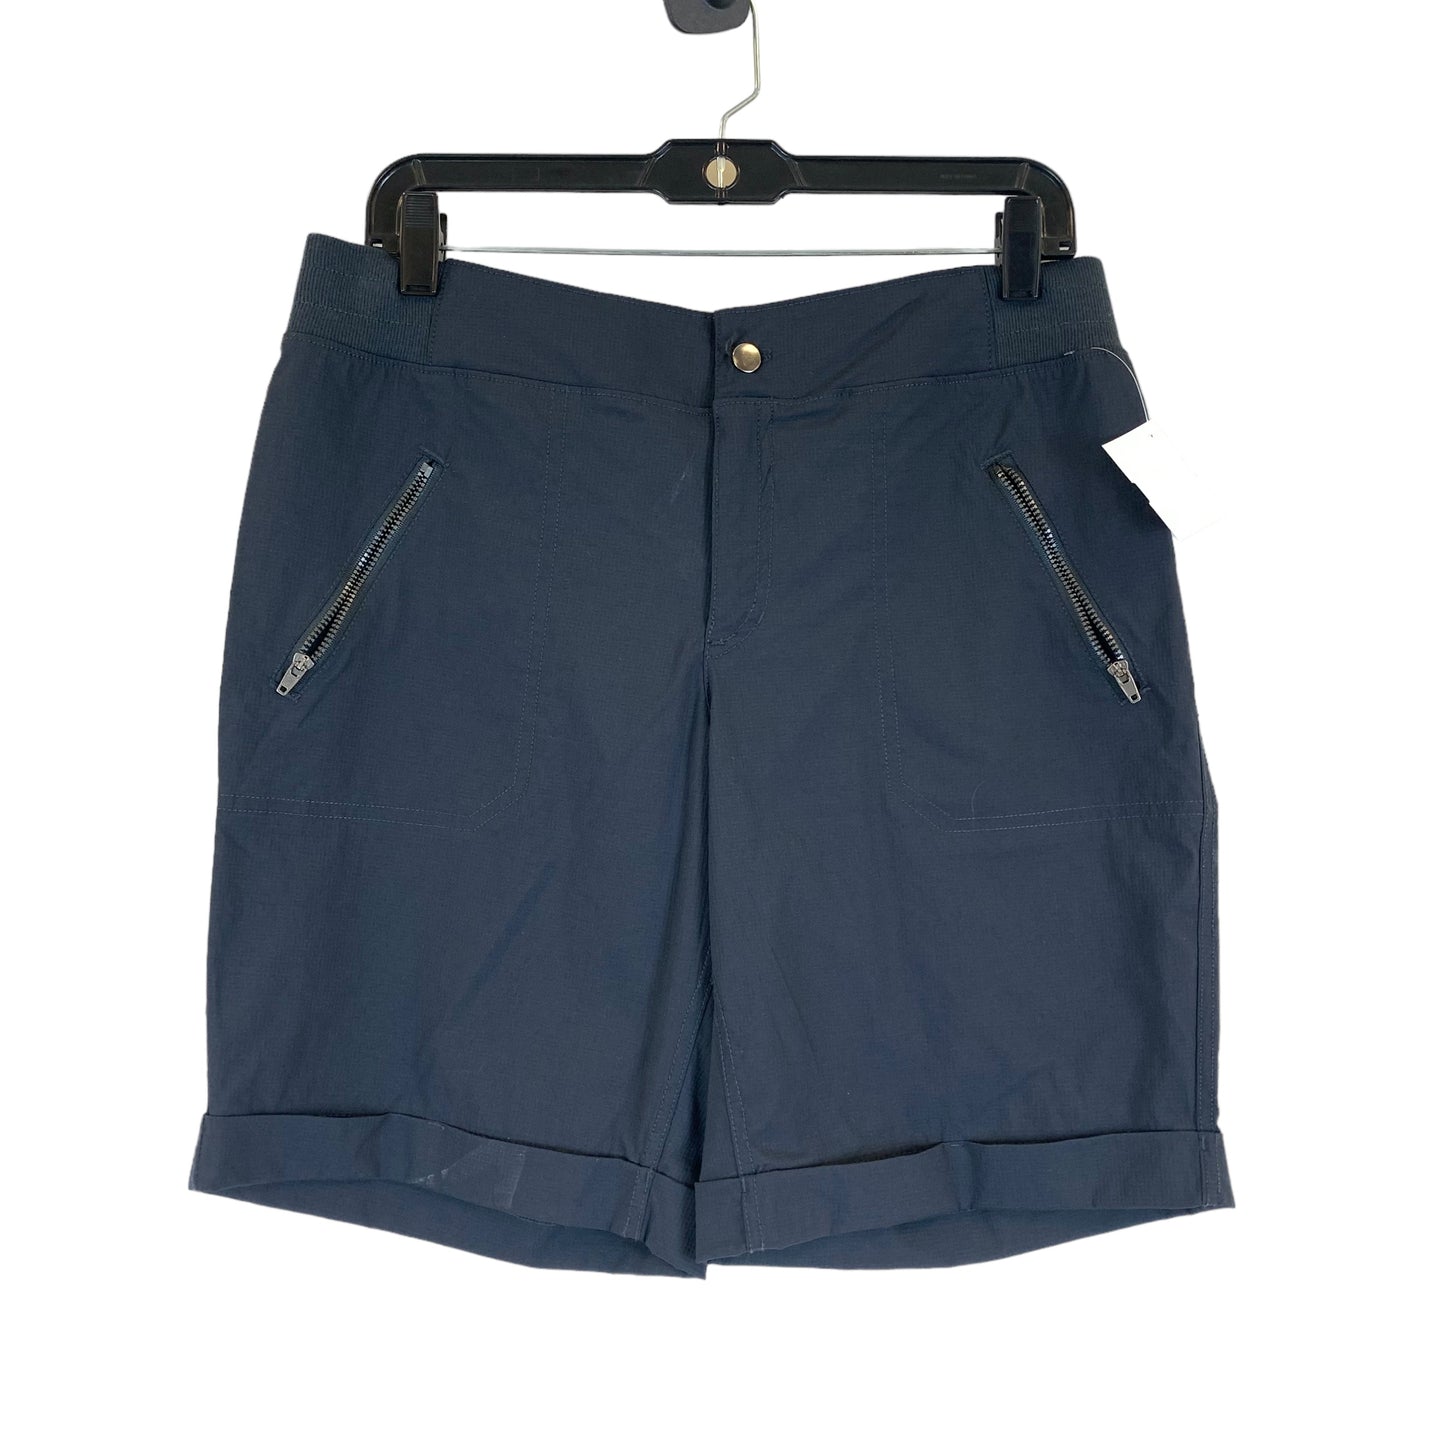 Shorts By Telluride  Size: M